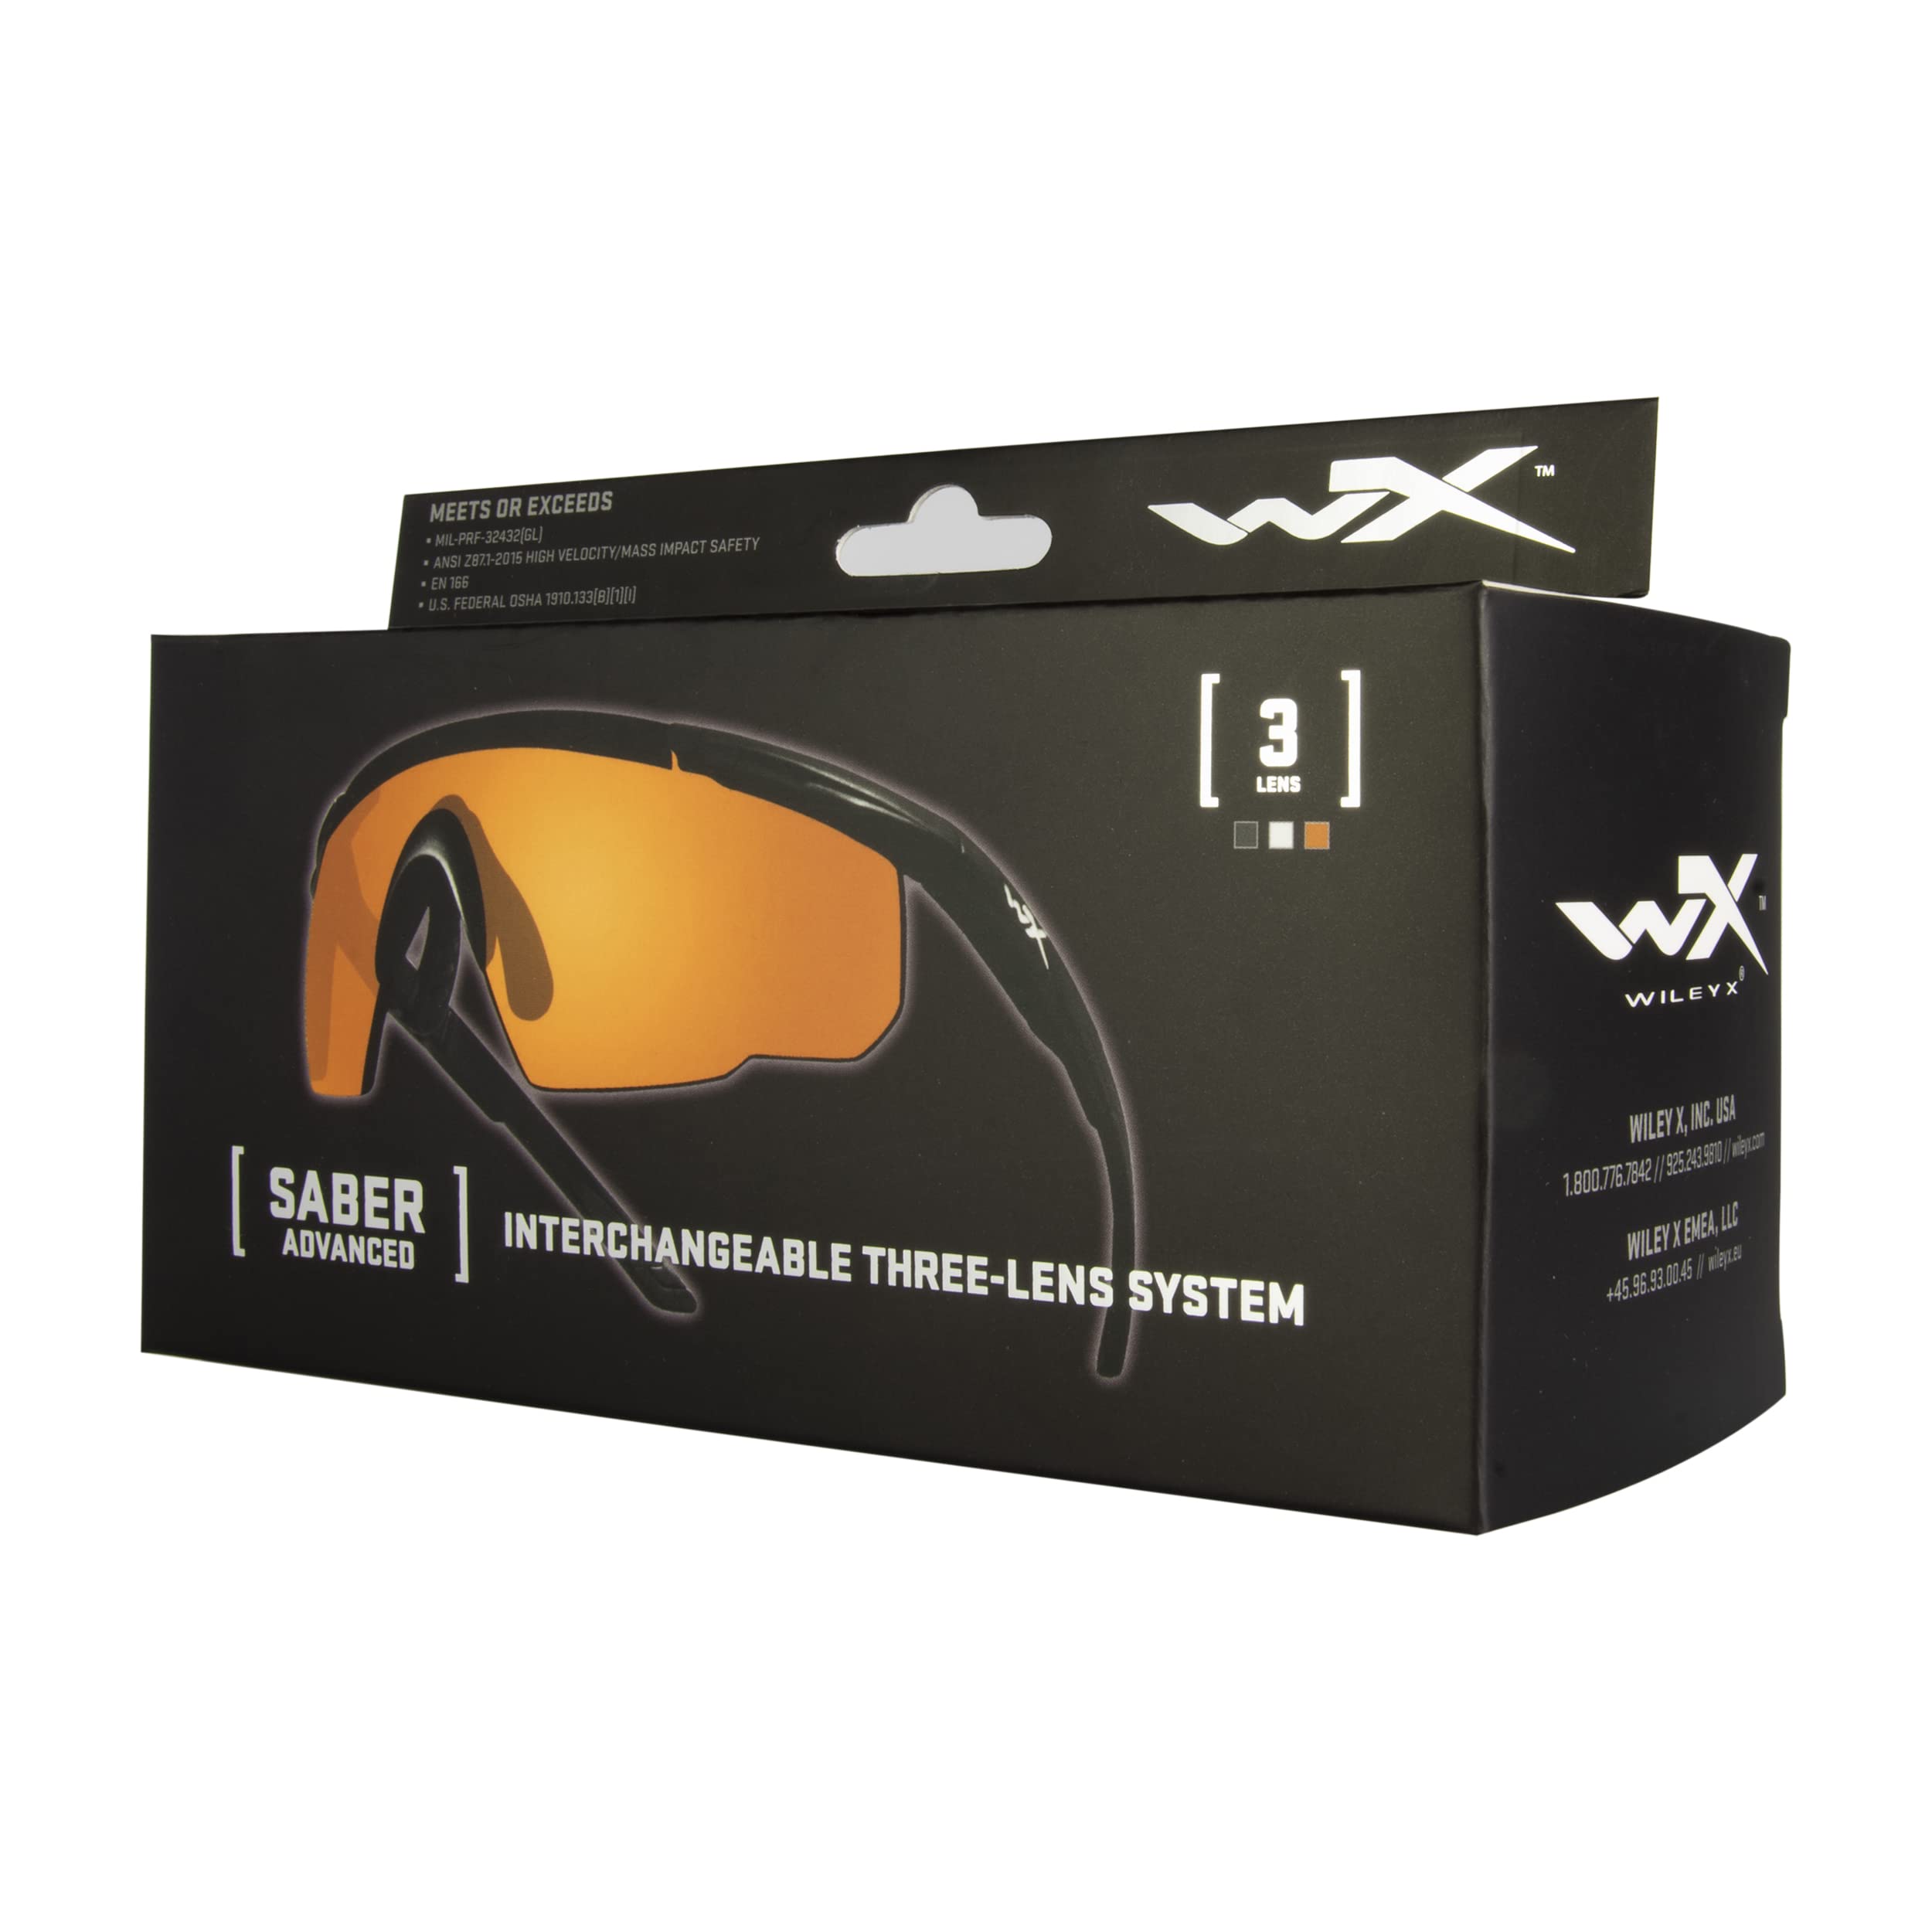 Wiley X Saber Advanced Shooting Glasses ANSI Z87.1+ Safety Sunglasses for Men UV and Eye Protection for Hunting and Shooting Matte Black Frames, Changeable Lenses, Ballistic Rated